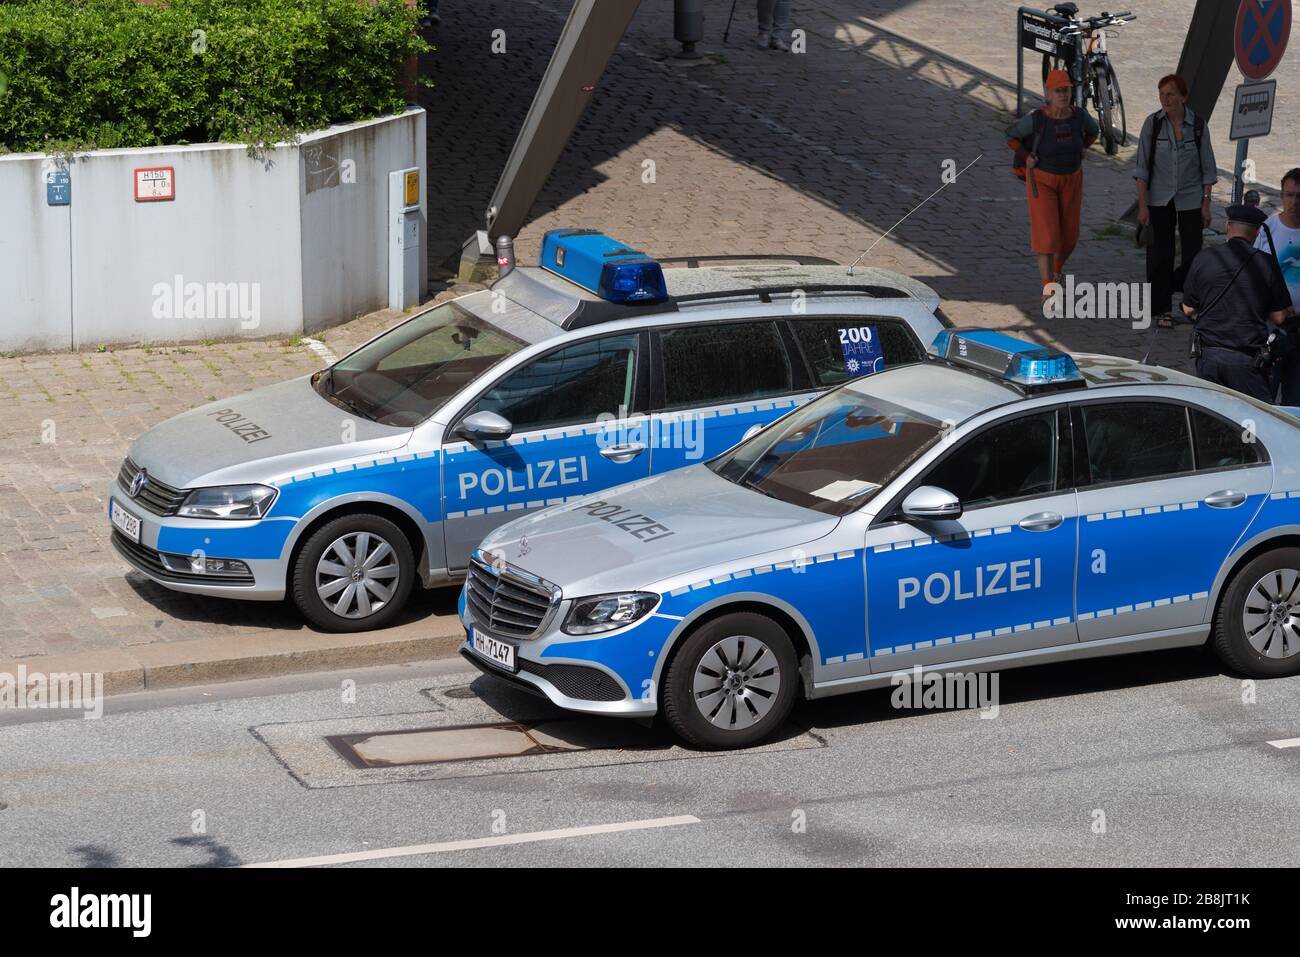 HAMBURG, GERMANY - MAY 12, 2018: Hamburg Police has 9,748 employees, including 6,174 uniformed policemen, 1,521 crime investigation officers, 498 offi Stock Photo